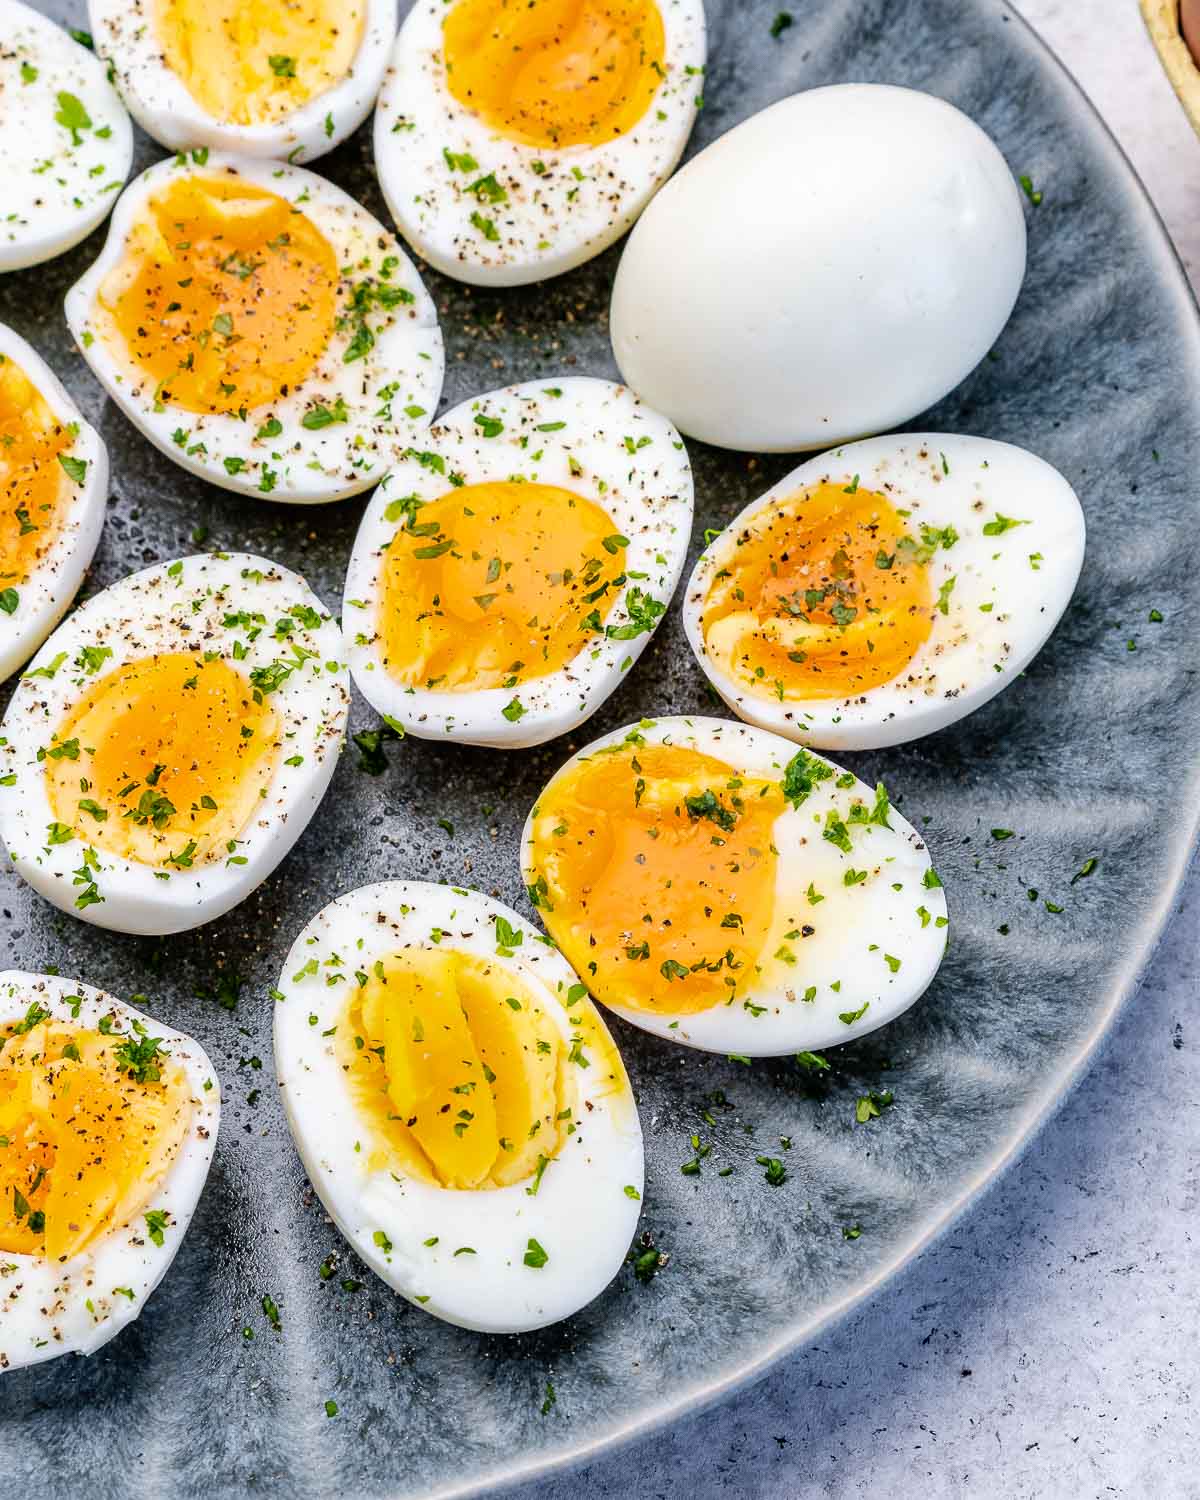 https://cleanfoodcrush.com/wp-content/uploads/2021/03/Clean-Food-Crush-How-to-Make-Perfectly-Boiled-Eggs-Clean-Eating-Recipe.jpg